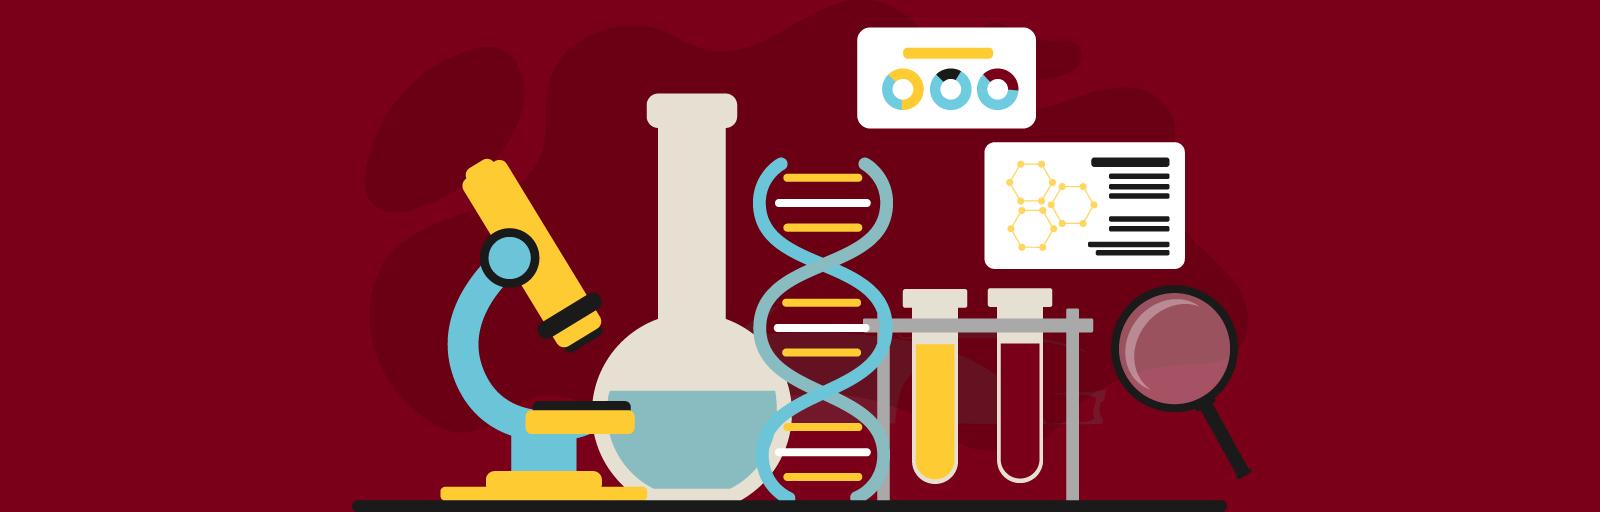 A graphic illustration of scientific equipment like a beaker, test tubes, and microscope, alongside graphs and diagrams and a DNA double helix.